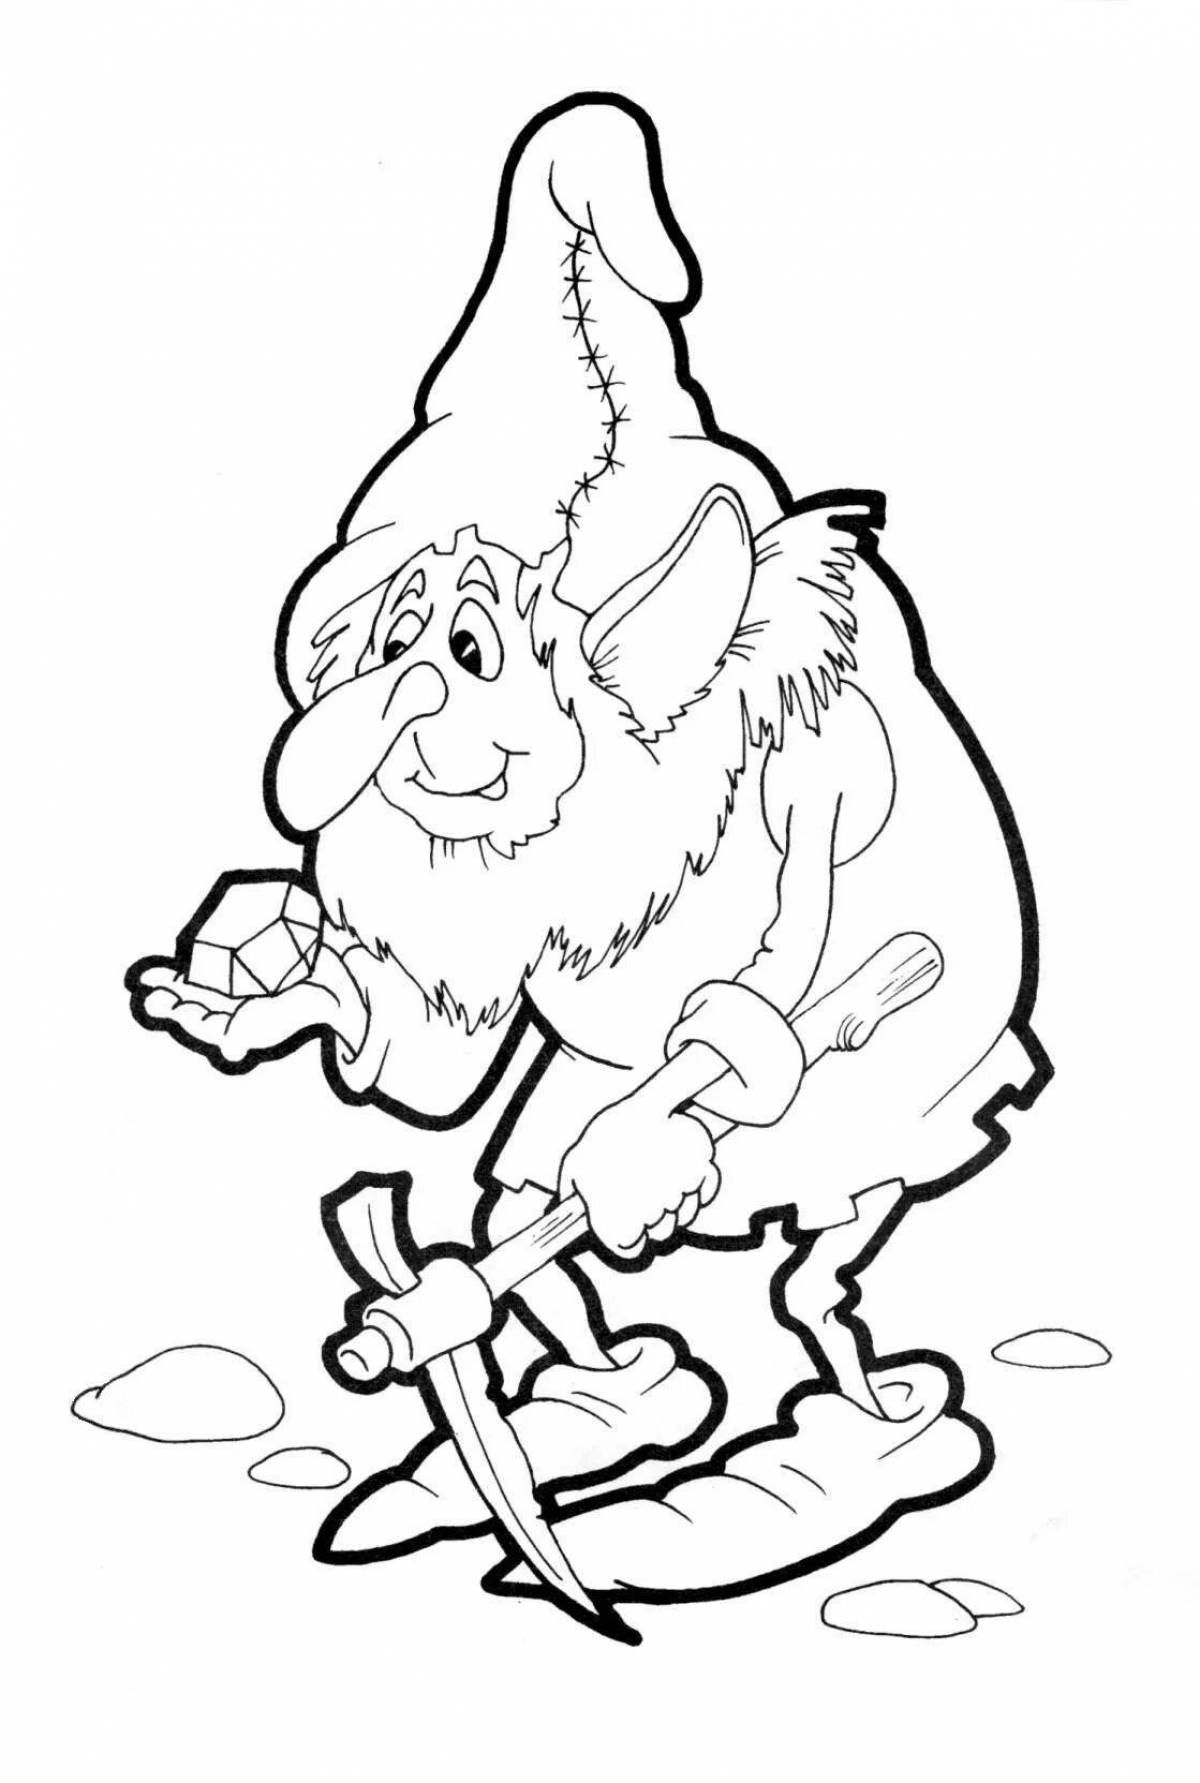 Animated goblin coloring page for babies